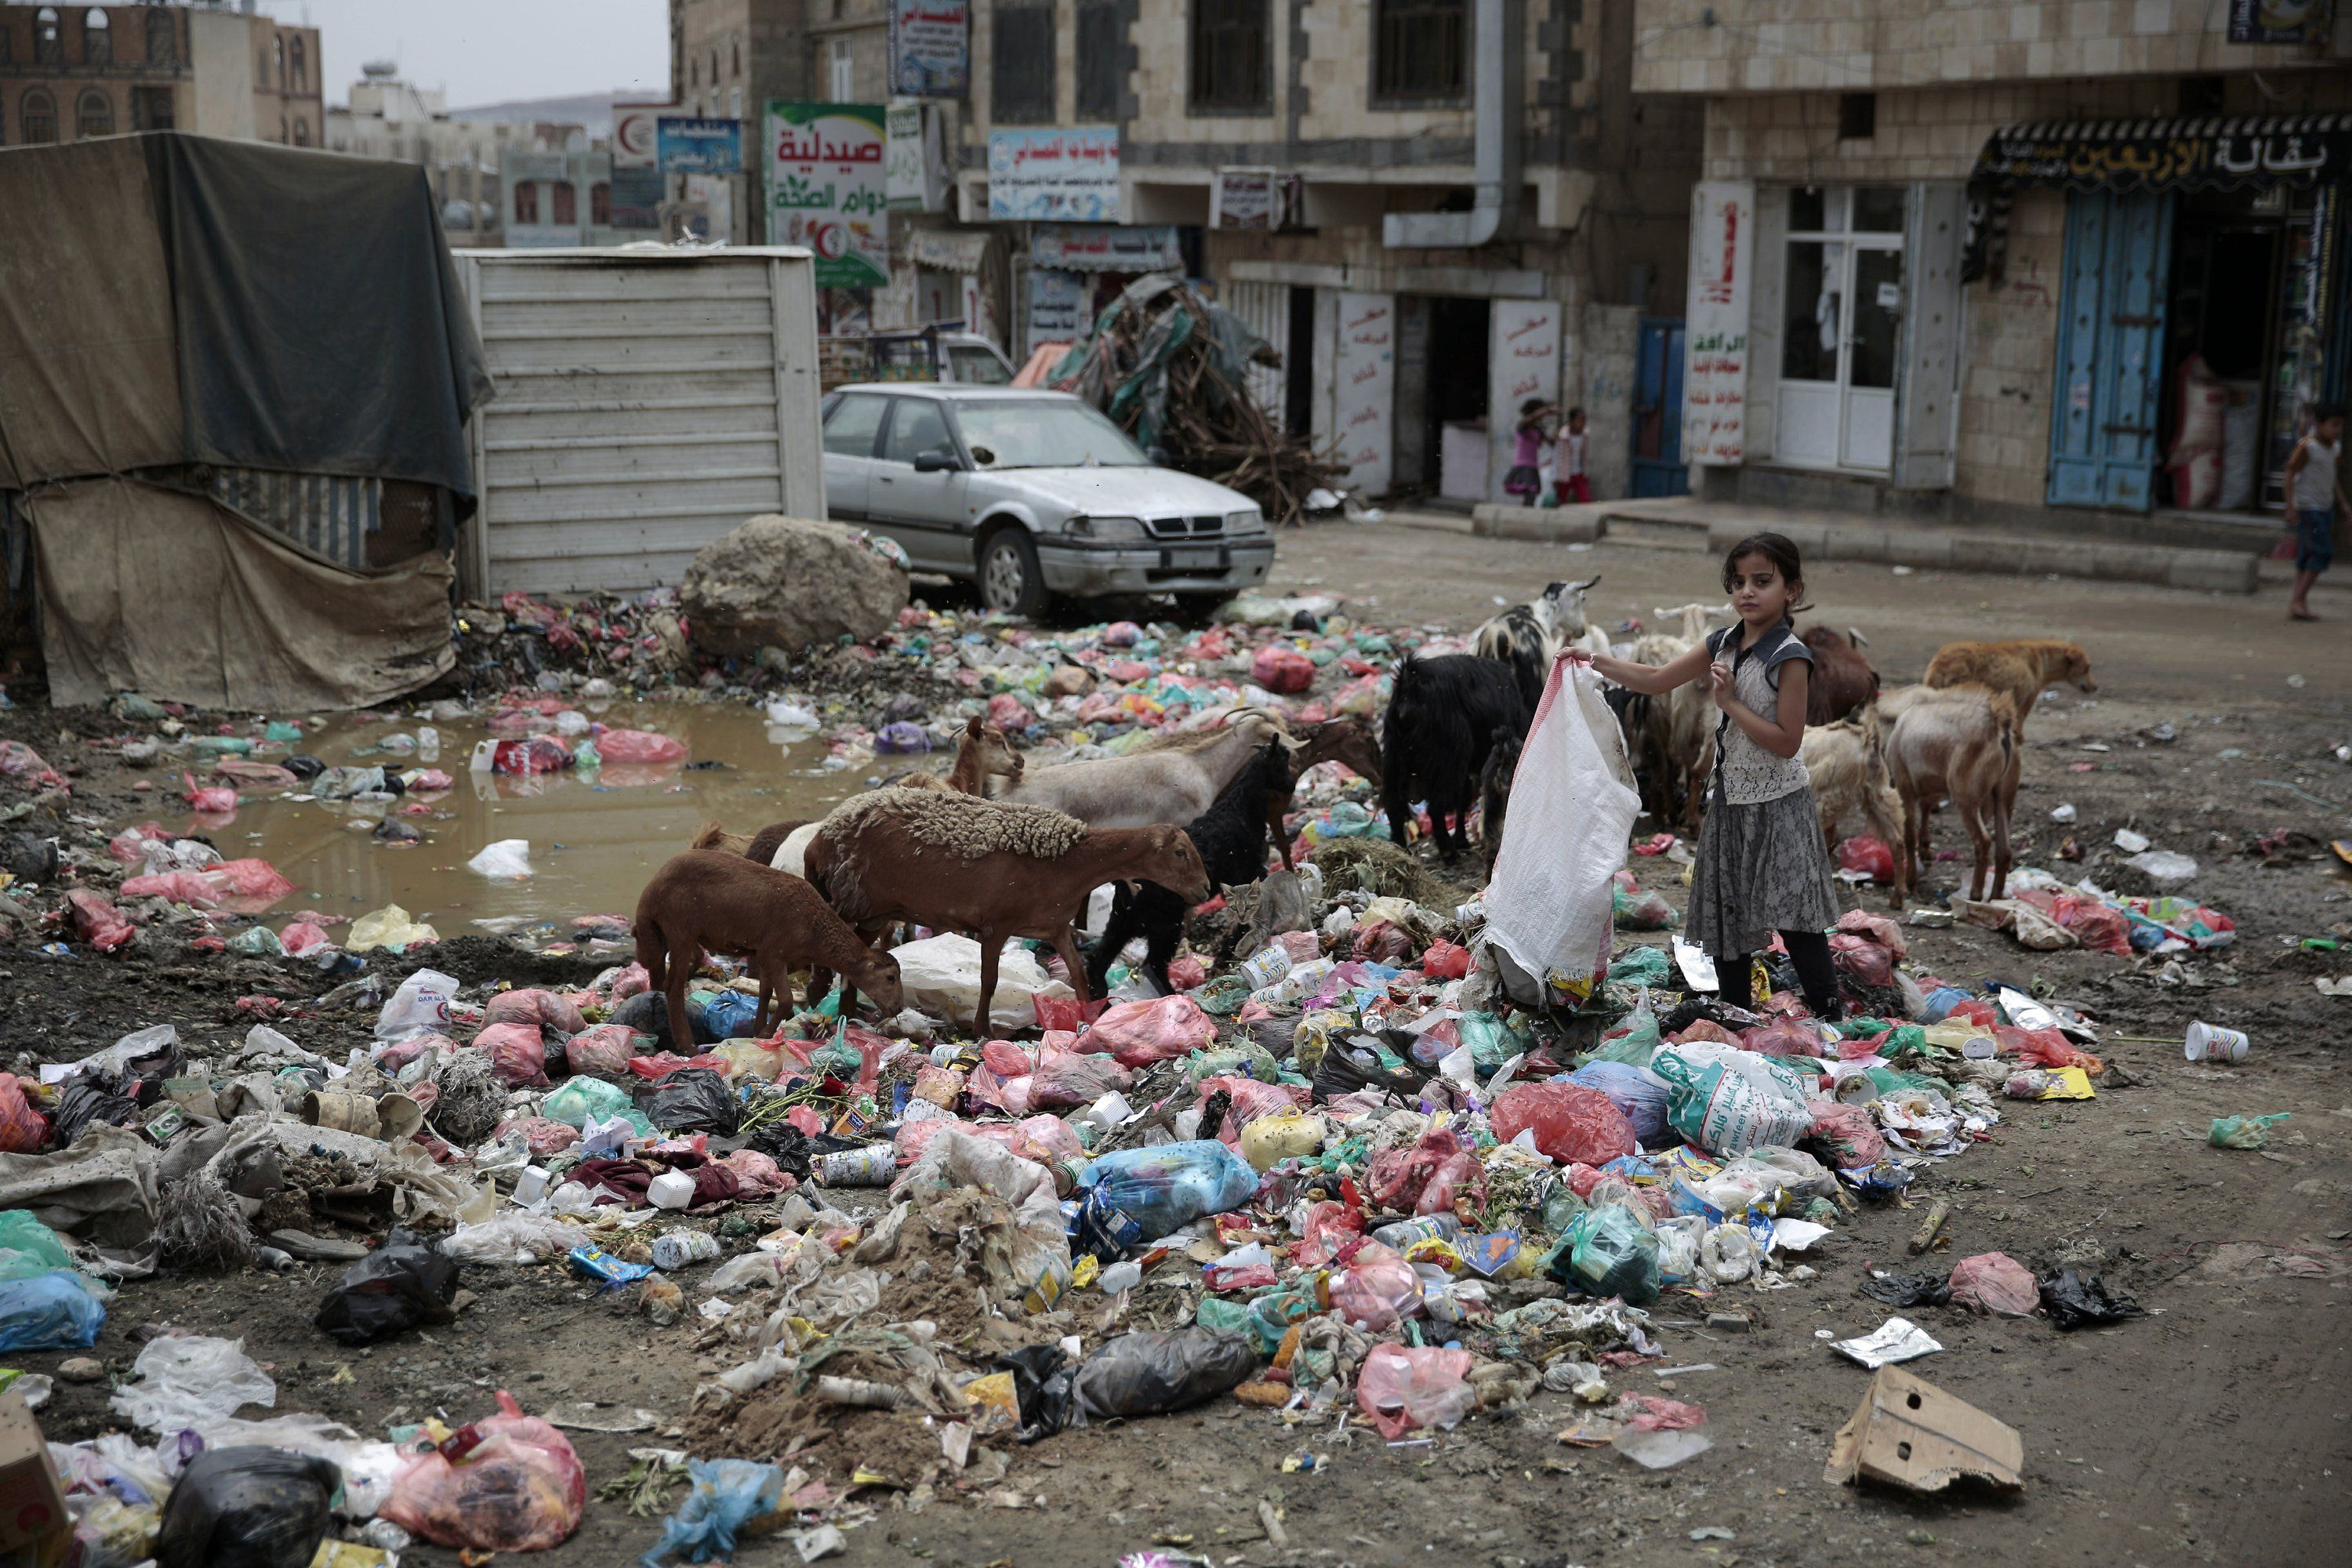 In this July 26, 2017 file, a girl scavenges for recyclable items at a garbage dump in a street in Sanaa, Yemen. An Associated Press investigation finds that Yemen’s massive cholera epidemic was aggravated by corruption and official intransigence. The investigation has found that both the Iranian-backed Houthis rebels and their main adversary in the war—the U.S—and Saudi-backed government that controls southern Yemen—impeded efforts by relief groups to stem the epidemic. Image by Hani Mohammed/AP. Yemen, 2017.